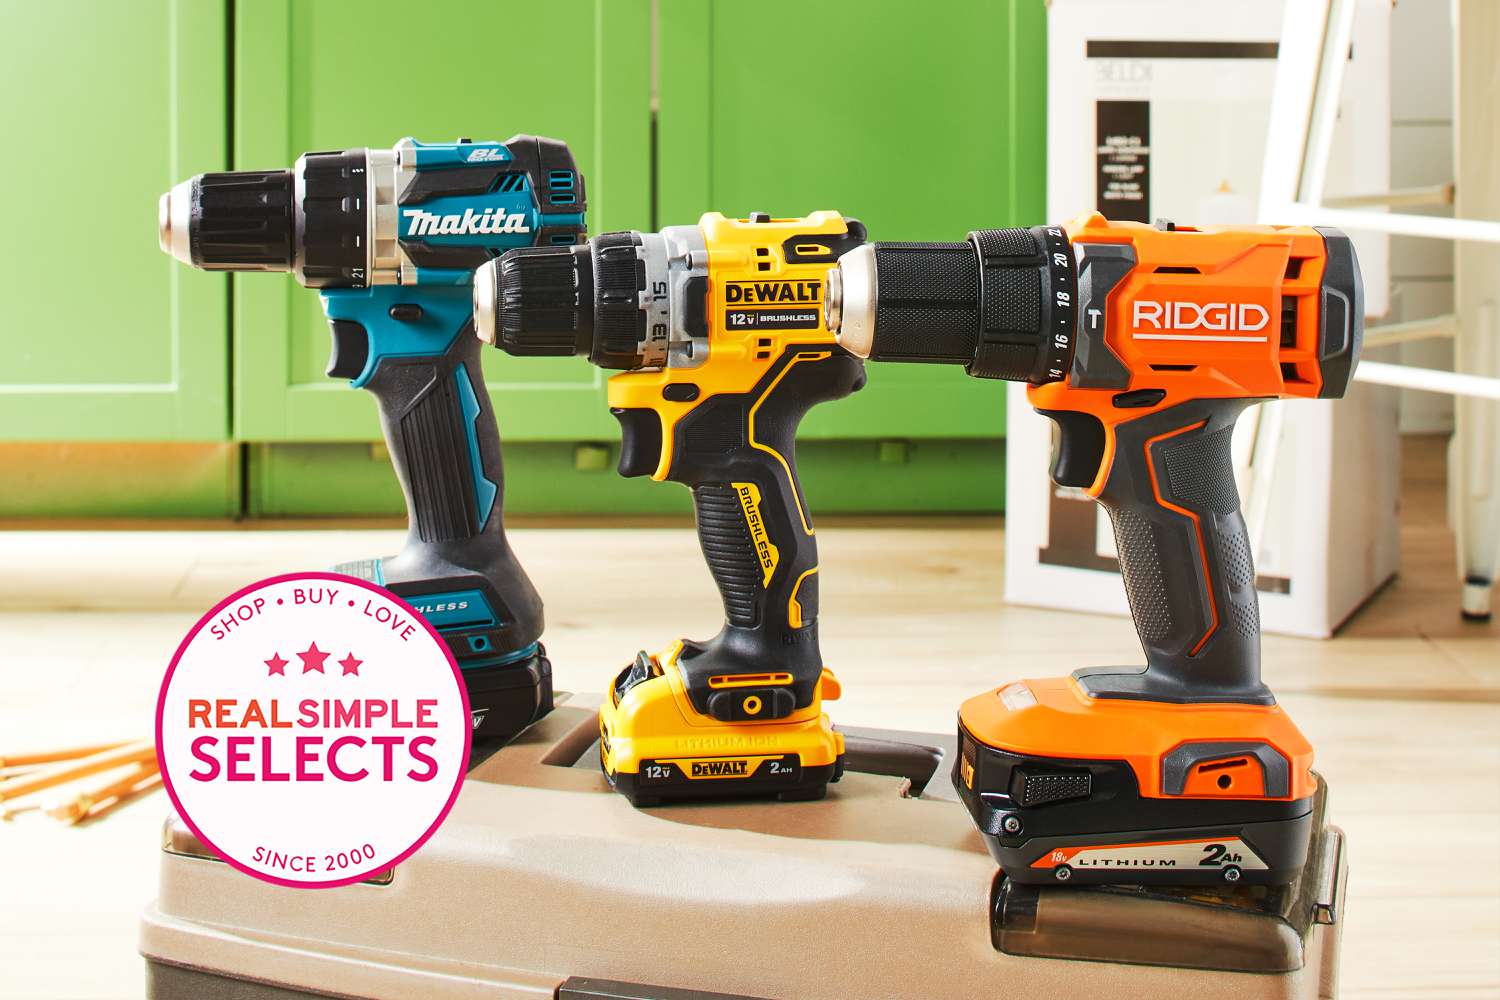 How to Make Cordless Drill More Powerful